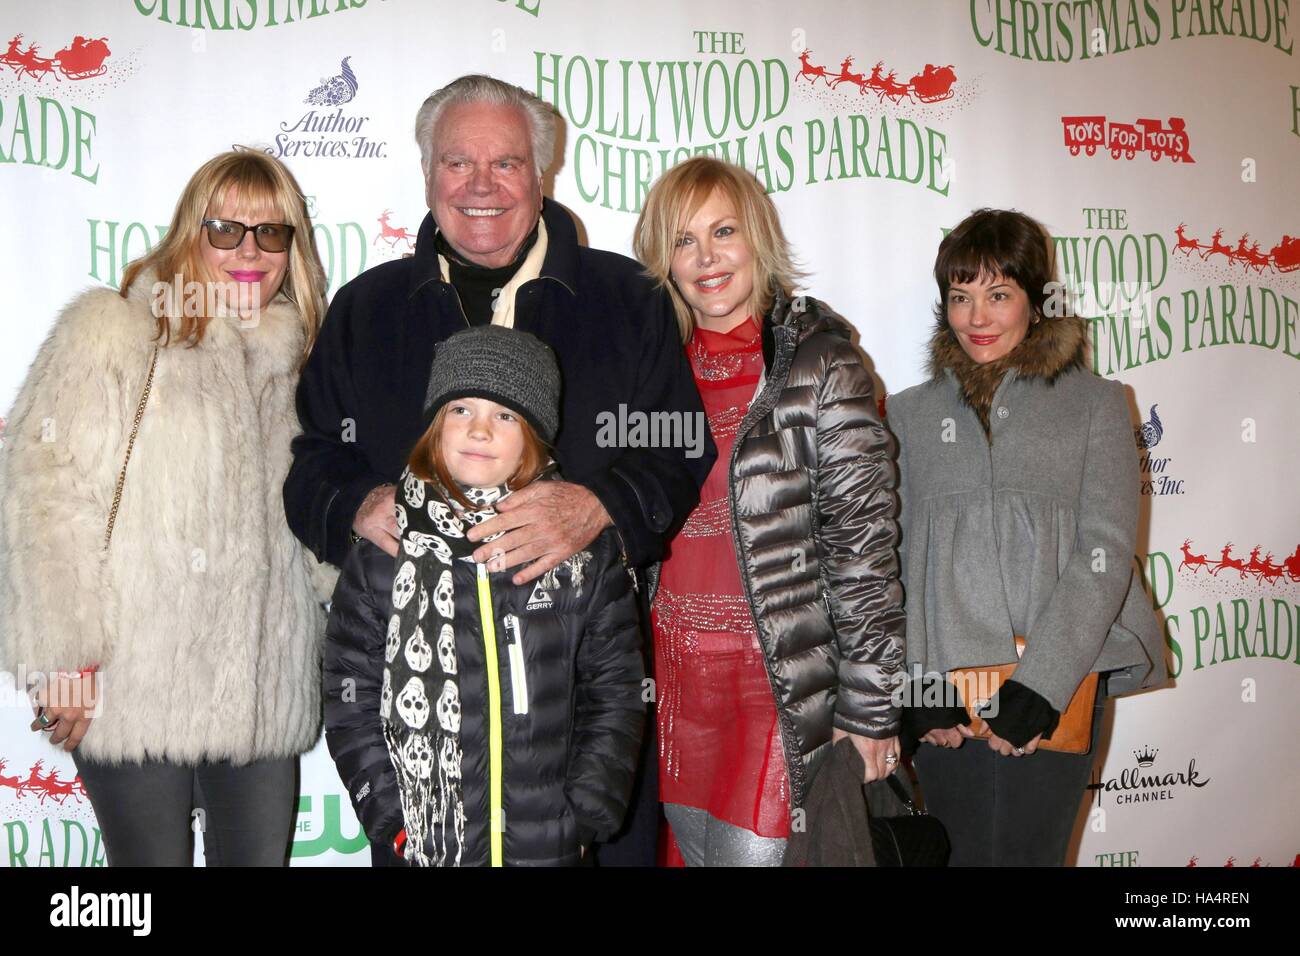 Los Angeles, CA, USA. 27th Nov, 2016. Courtney Brooke Wagner, Robert Wagner, Riley Wagner-Lewis, Katie Wagner, Natasha Gregson Wagner in attendance for The 85th Annual Hollywood Christmas Parade, Hollywood Boulevard, Los Angeles, CA November 27, 2016. Credit:  Priscilla Grant/Everett Collection/Alamy Live News Stock Photo